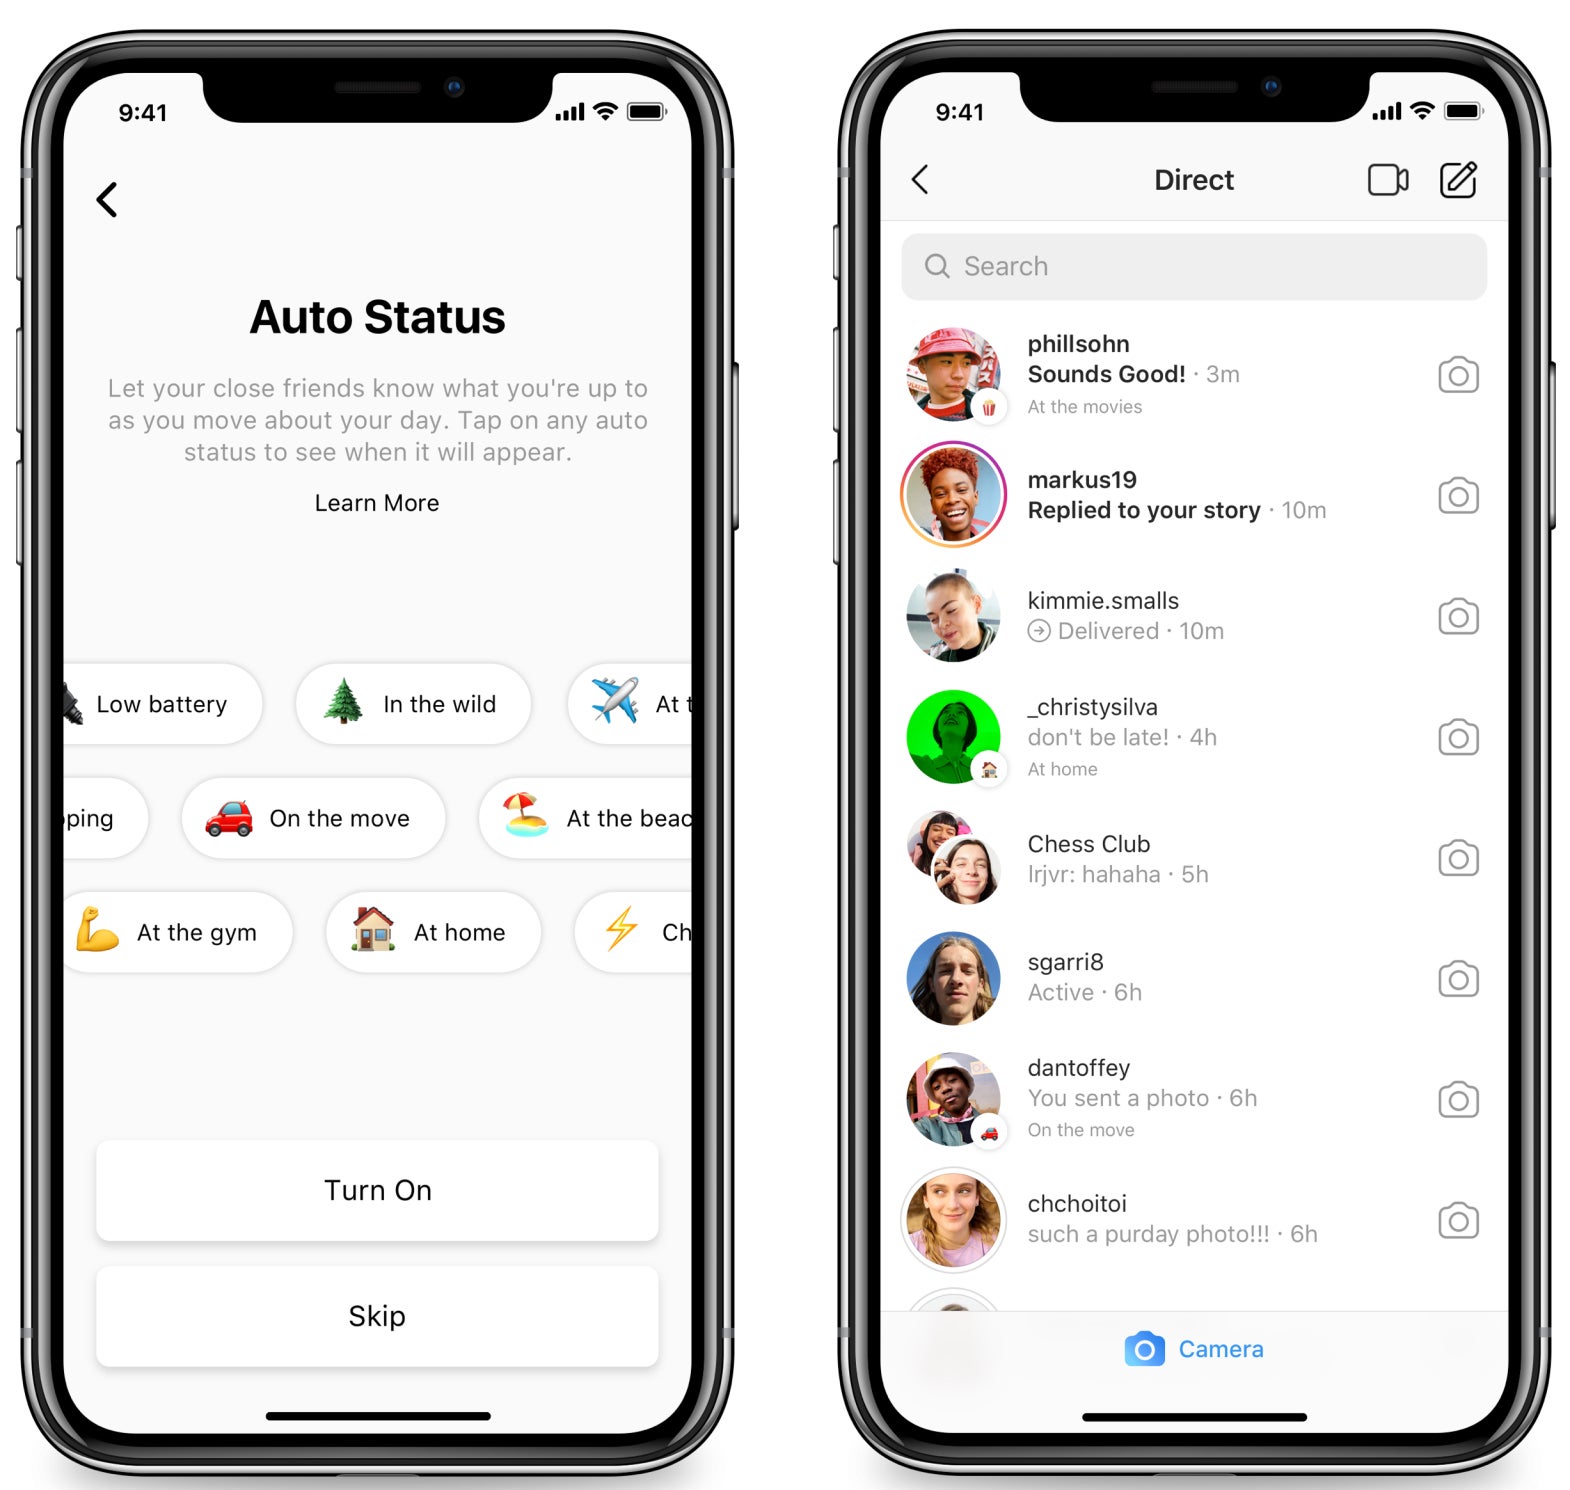 When you have no time for sharing images or messages, you can share your Status or Auto Status - Threads from Instagram is a new app made to keep you in touch with your circle of close friends